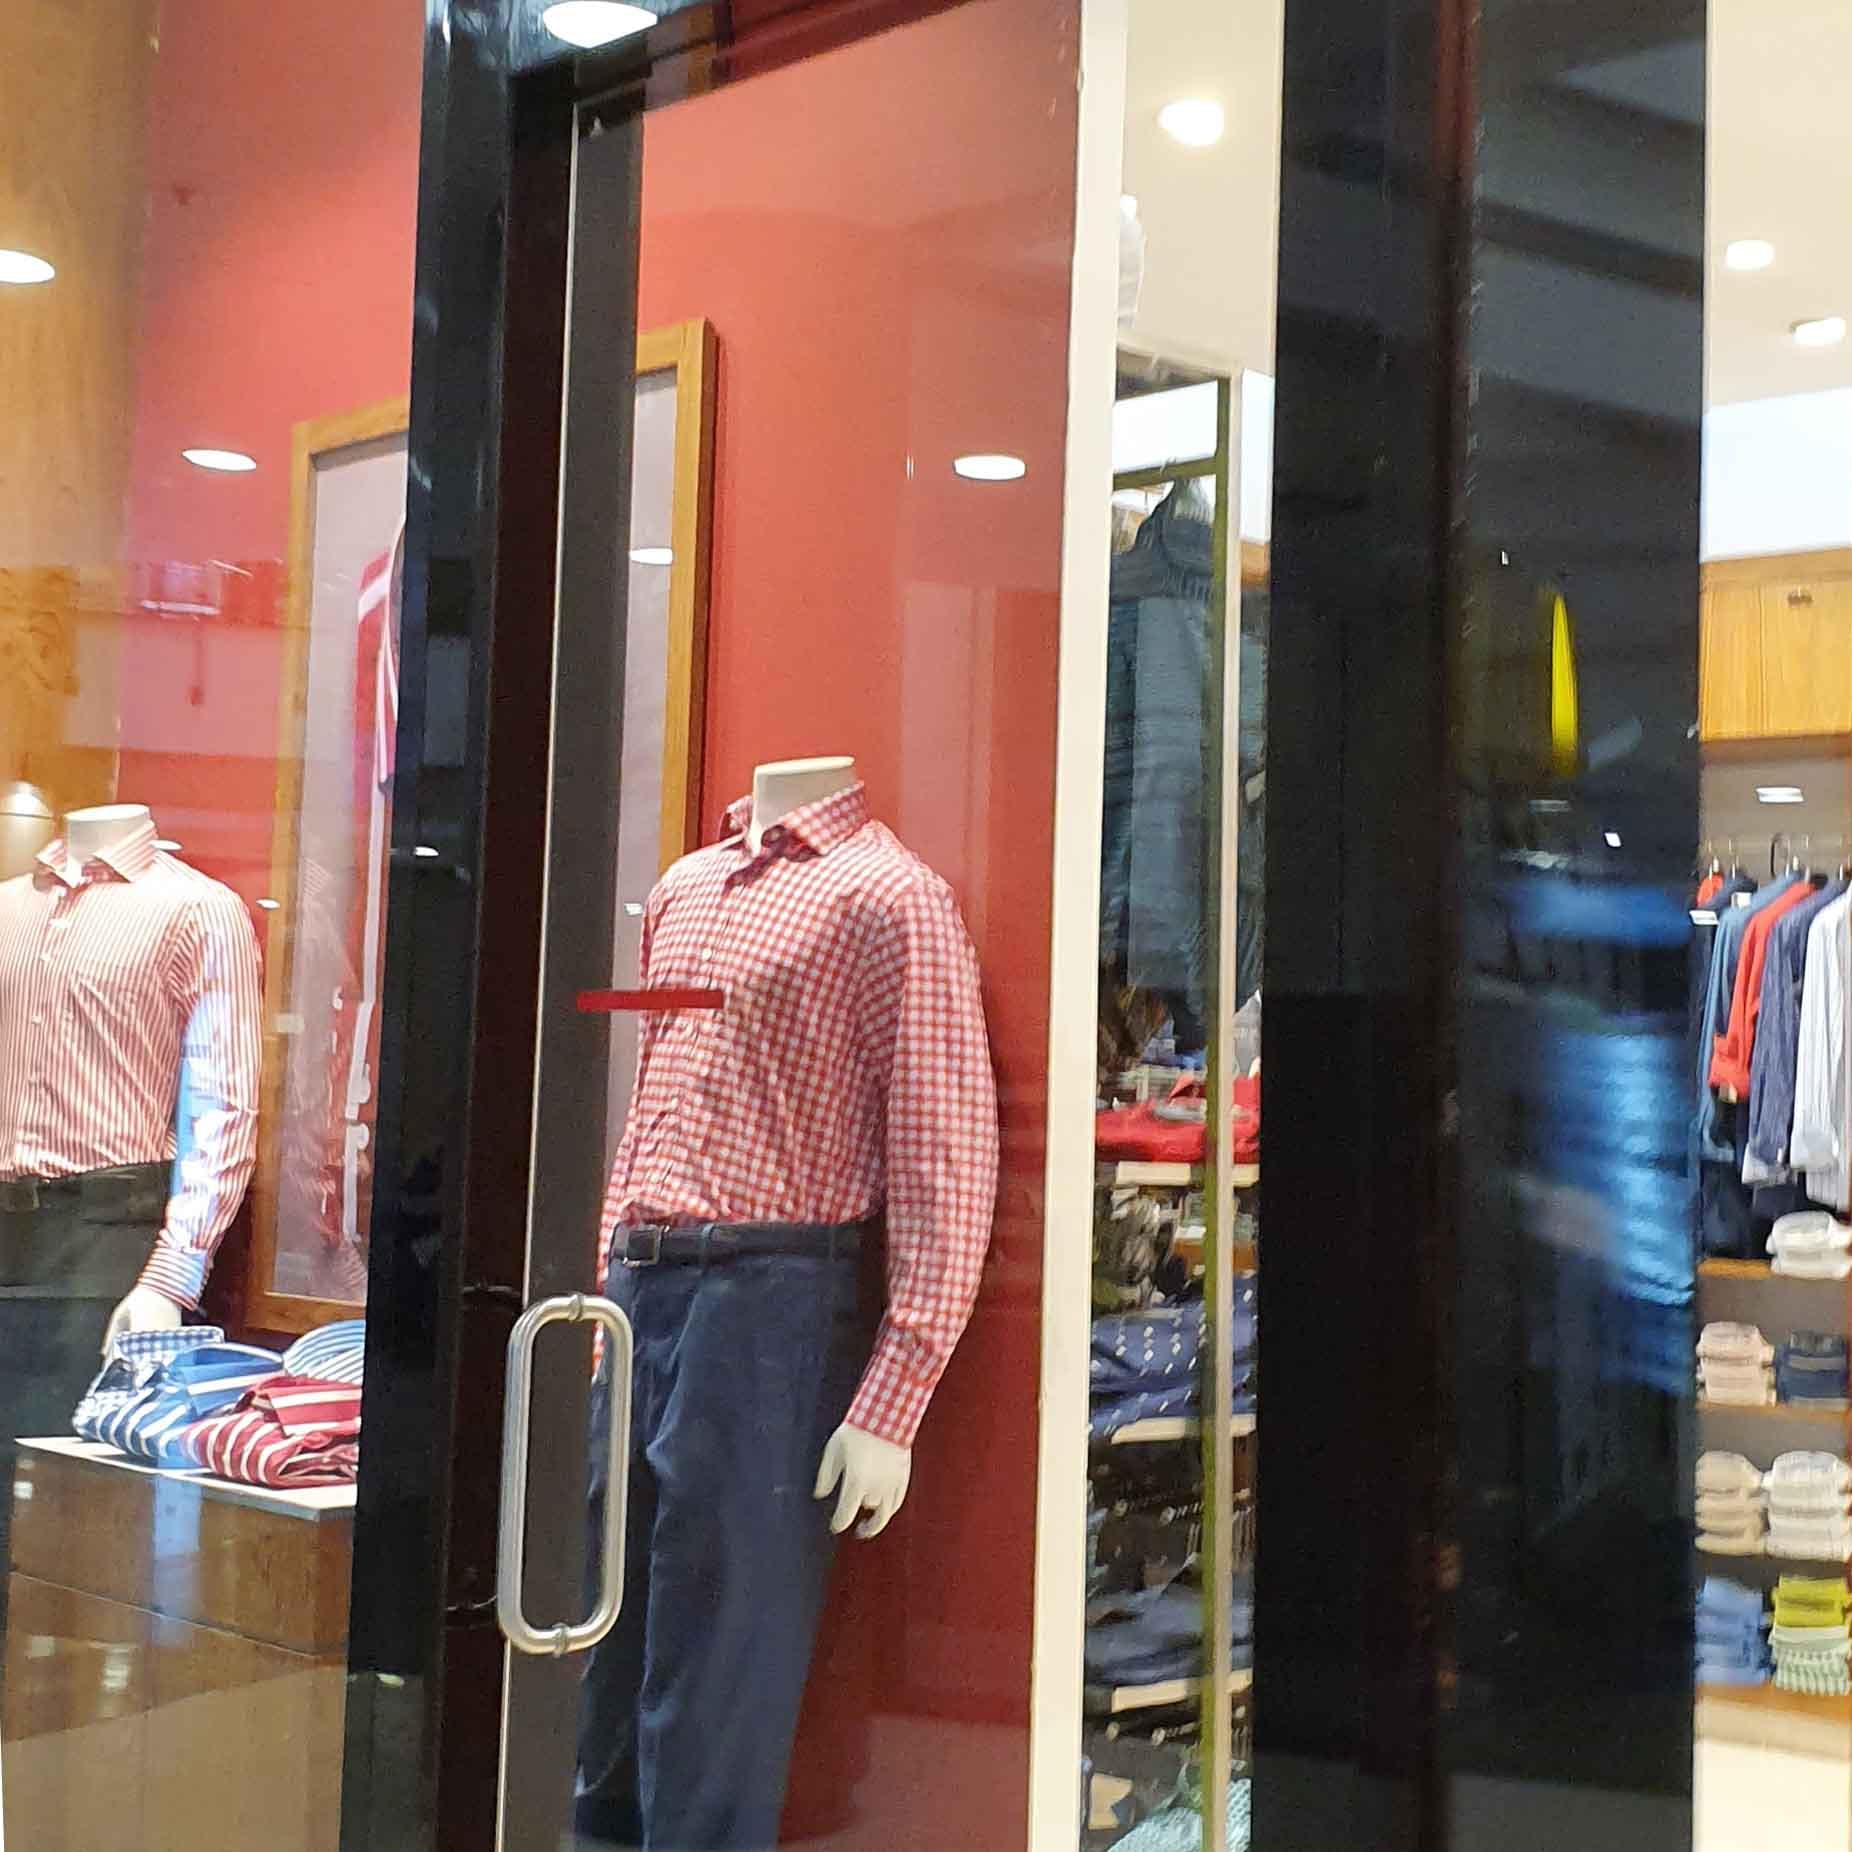 Boutique,Display window,Jeans,Display case,Retail,Textile,Shopping mall,Building,Door,Outlet store